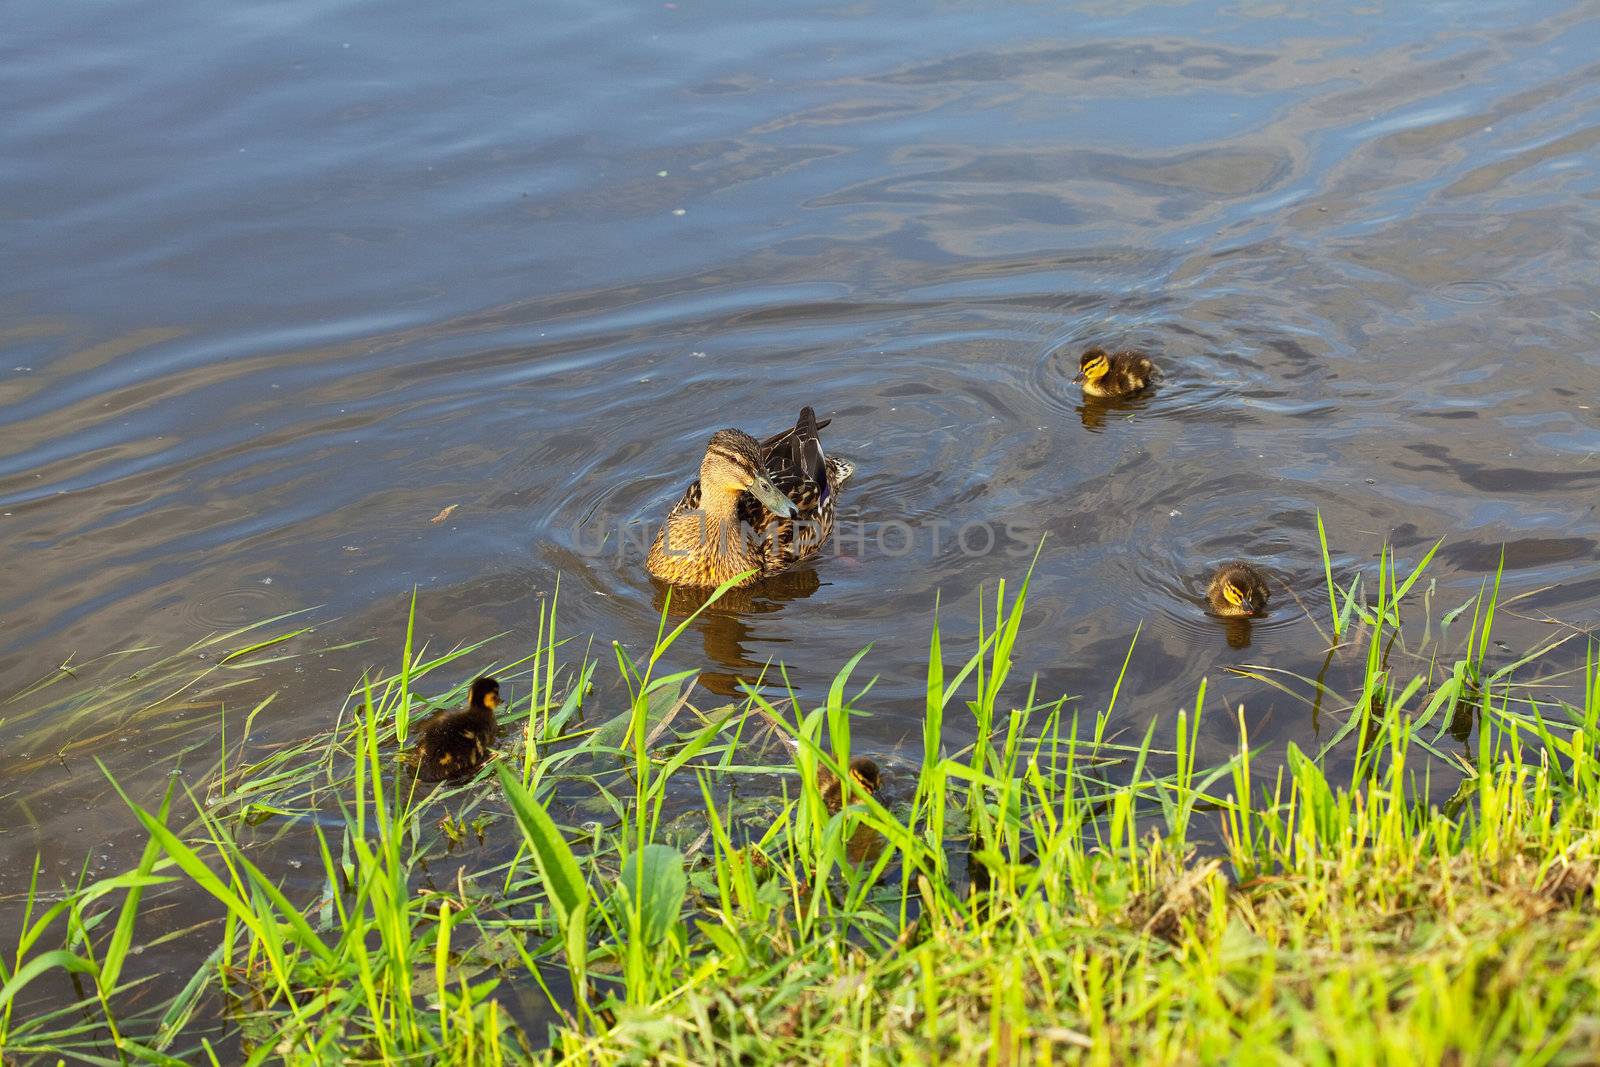 duck with ducklings swimming in the water